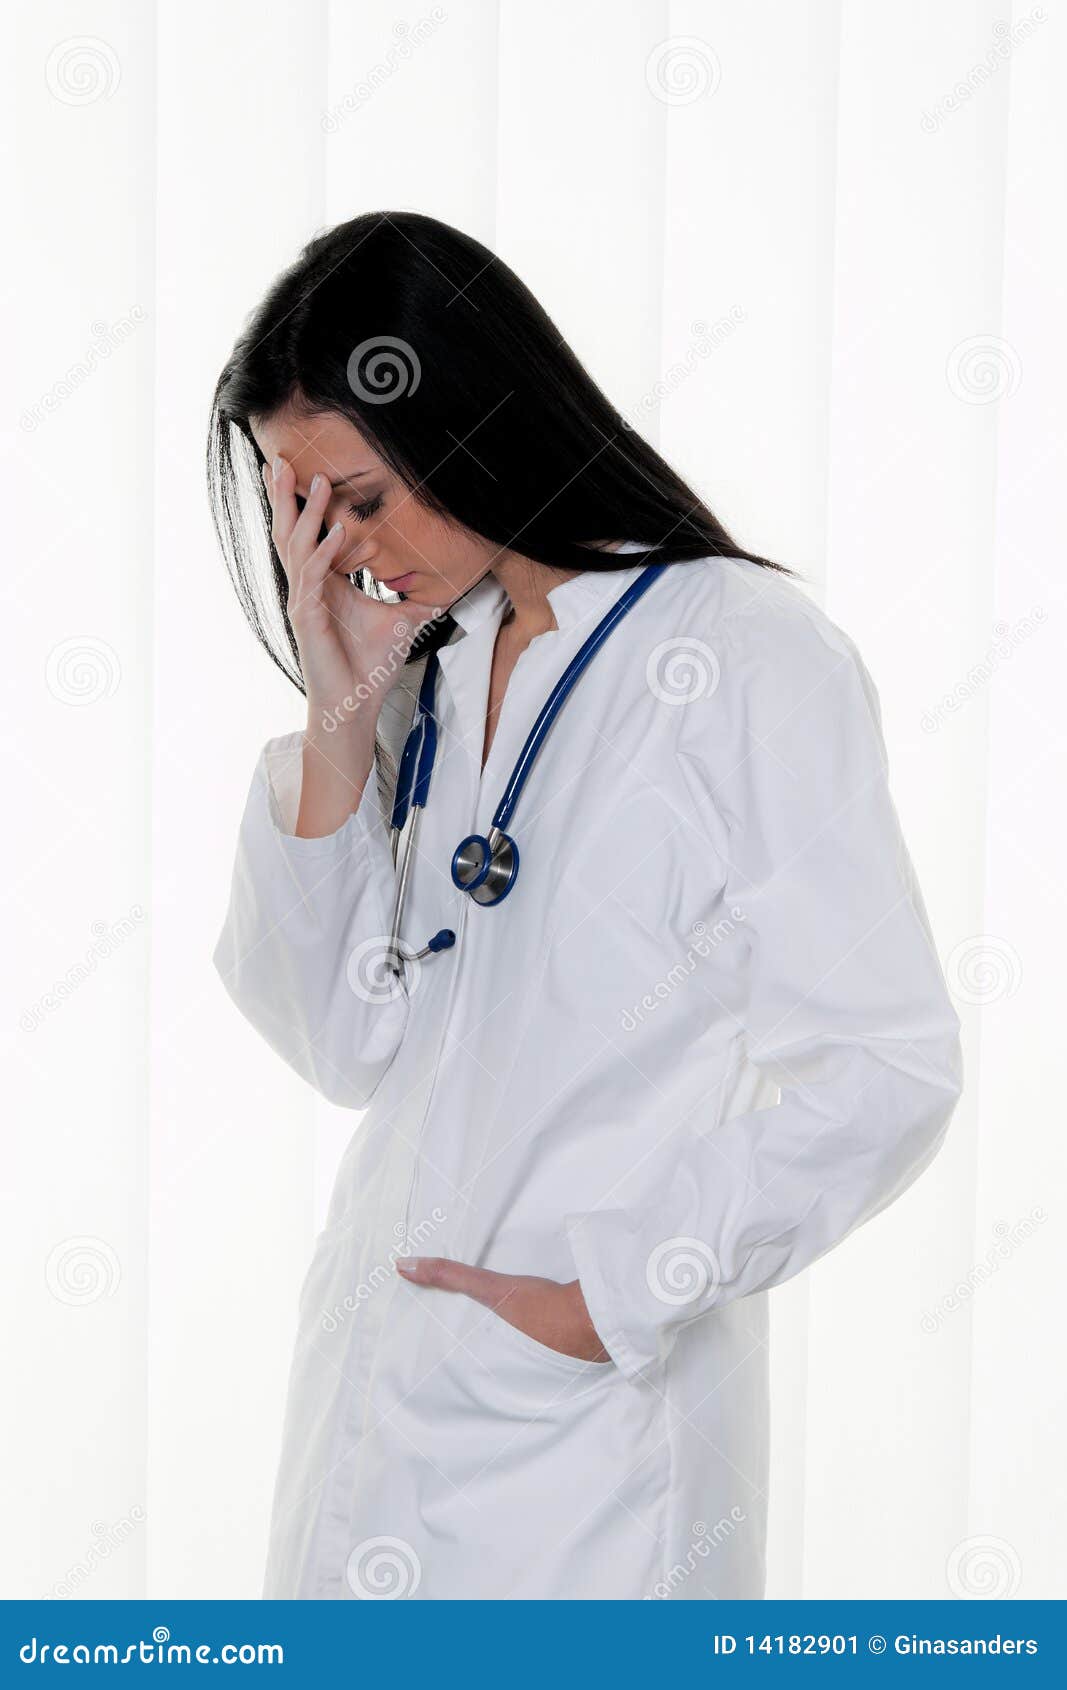 overburdened doctor at the hospital in the stress